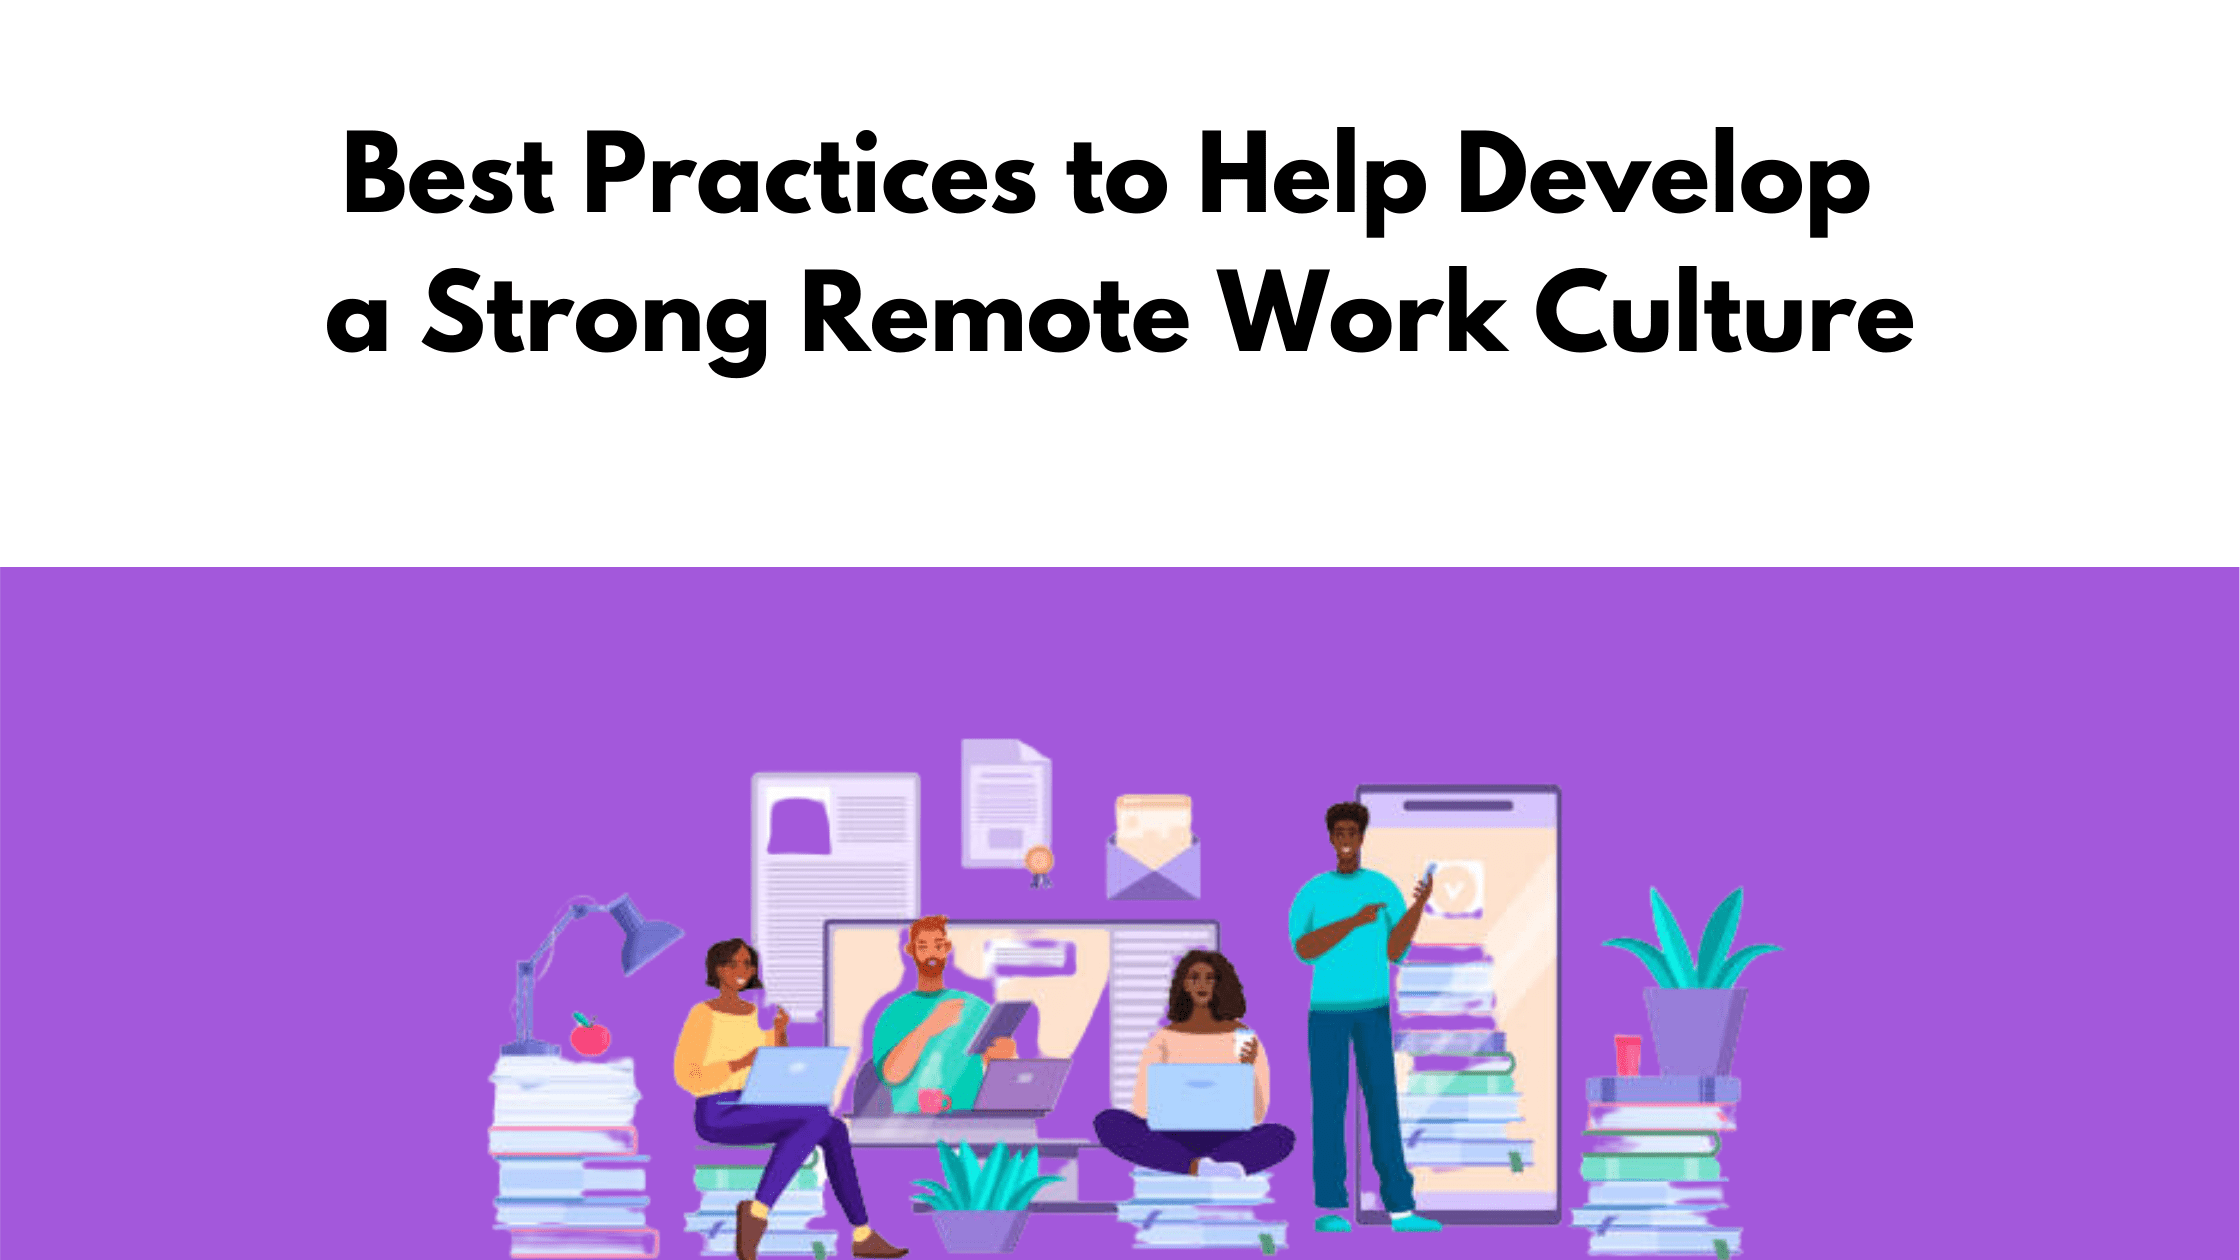 Best Practices to Help Develop a Strong Remote Work Culture